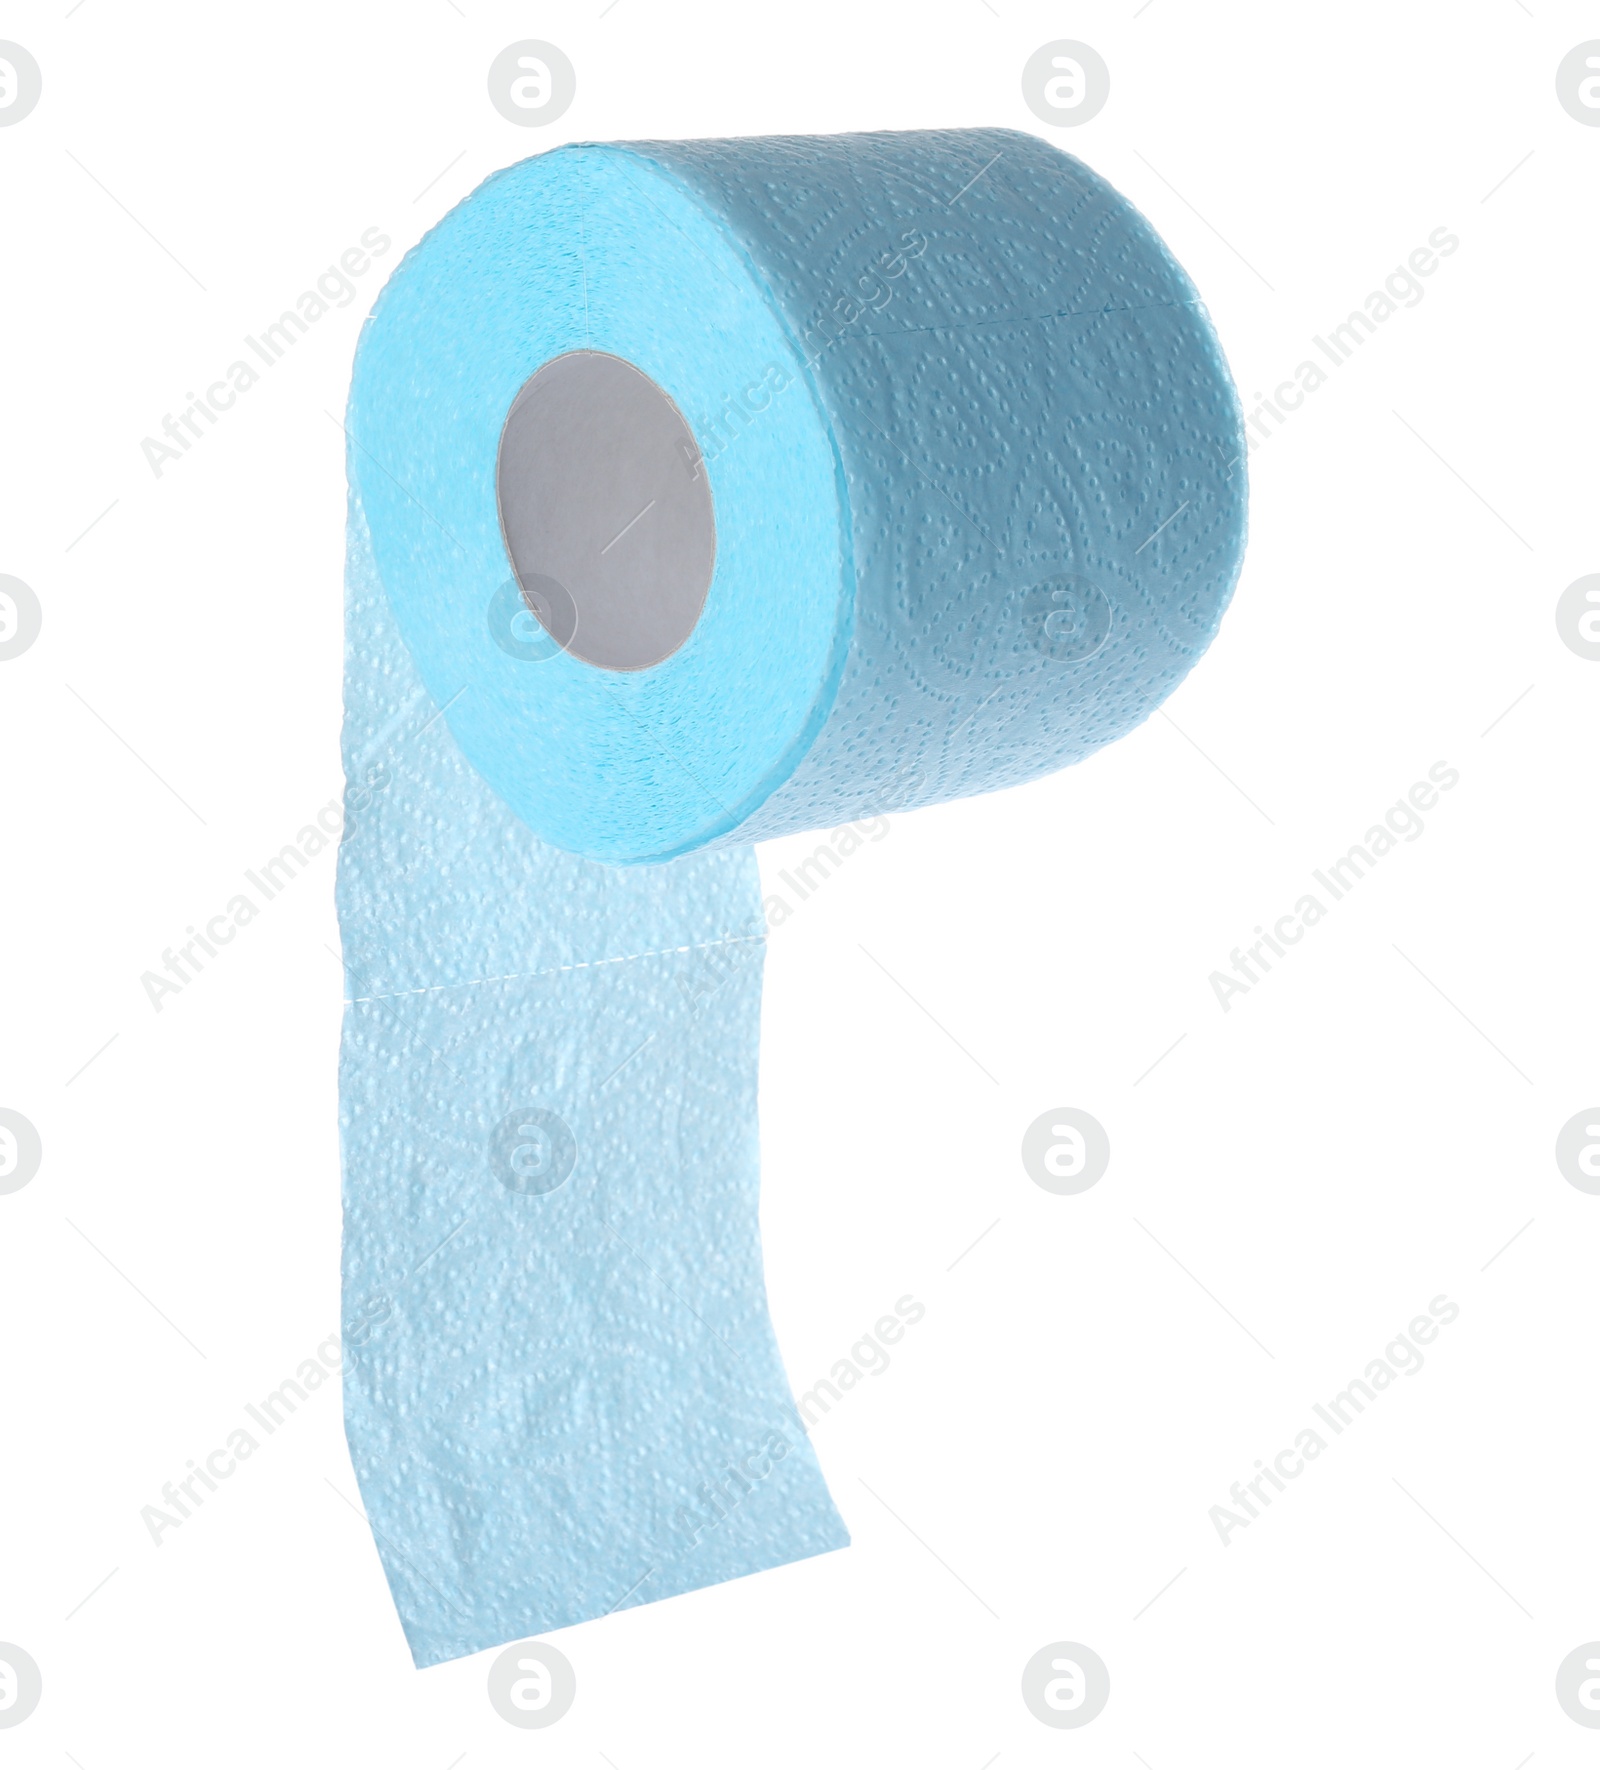 Photo of Roll of toilet paper on white background. Personal hygiene